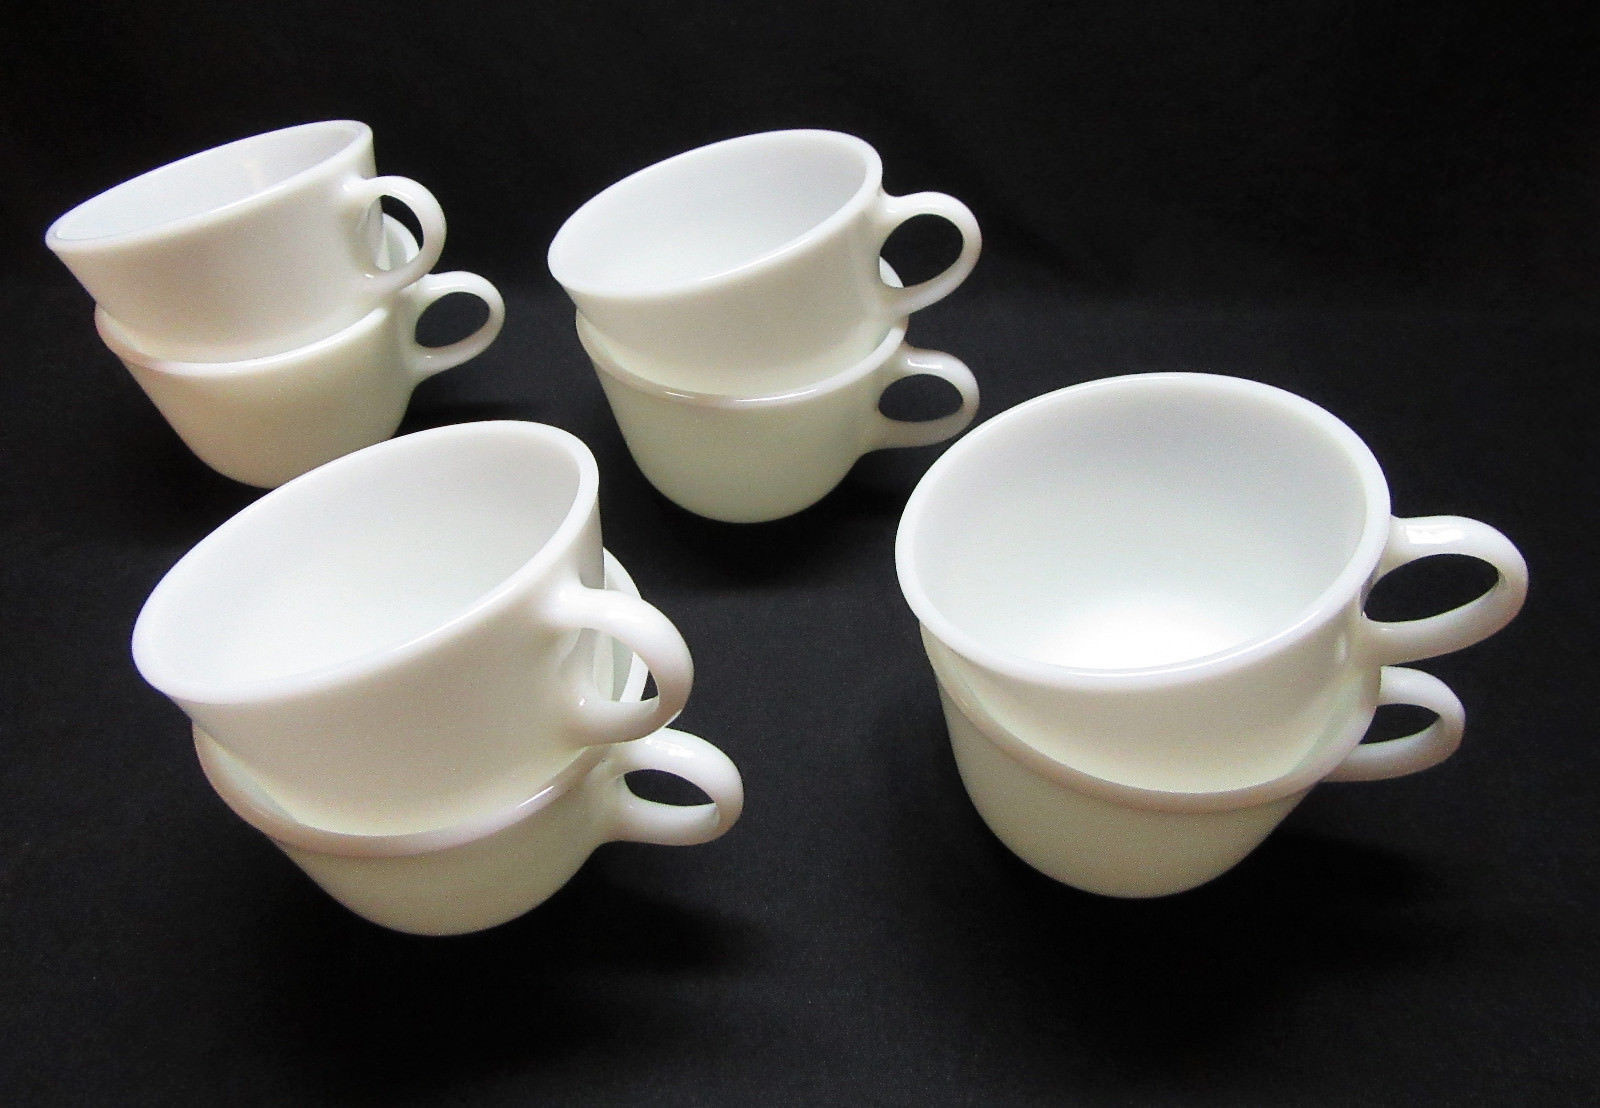 20 Fabulous Antique White Milk Glass Vases 2024 free download antique white milk glass vases of set of 8 vintage pyrex white milk glass 8 oz mugs coffee tea cups inside 1 of 6only 1 available